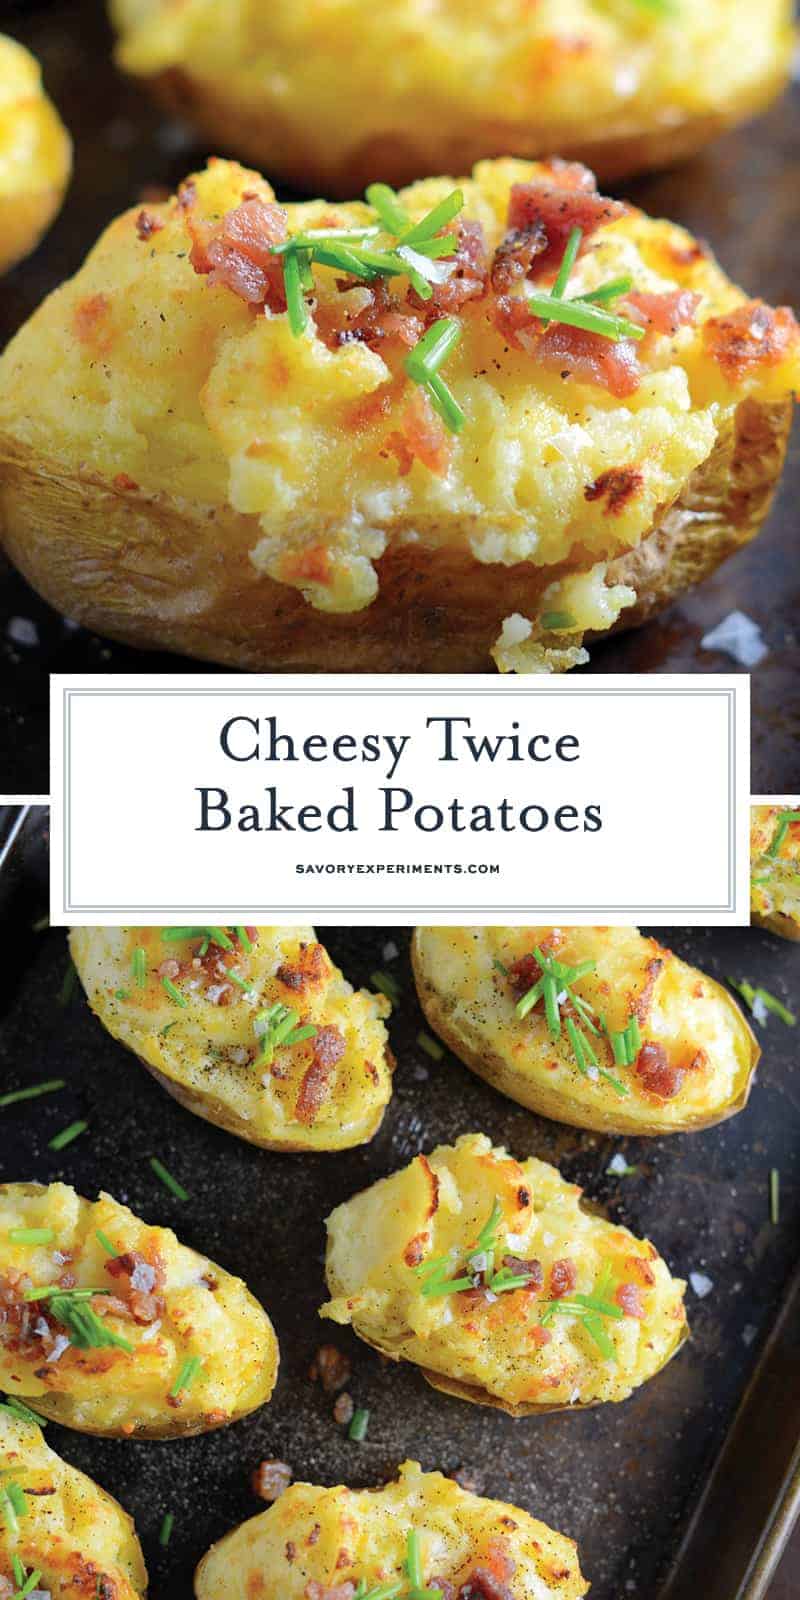 Cheesy Twice Baked Potatoes are velvety, buttery and cheesy- the perfect trifecta of potato perfection and the ultimate potato side dish! #potatosidedishes #twicebakedpotatoes #cheesypotatoes www.savoryexperiments.com 